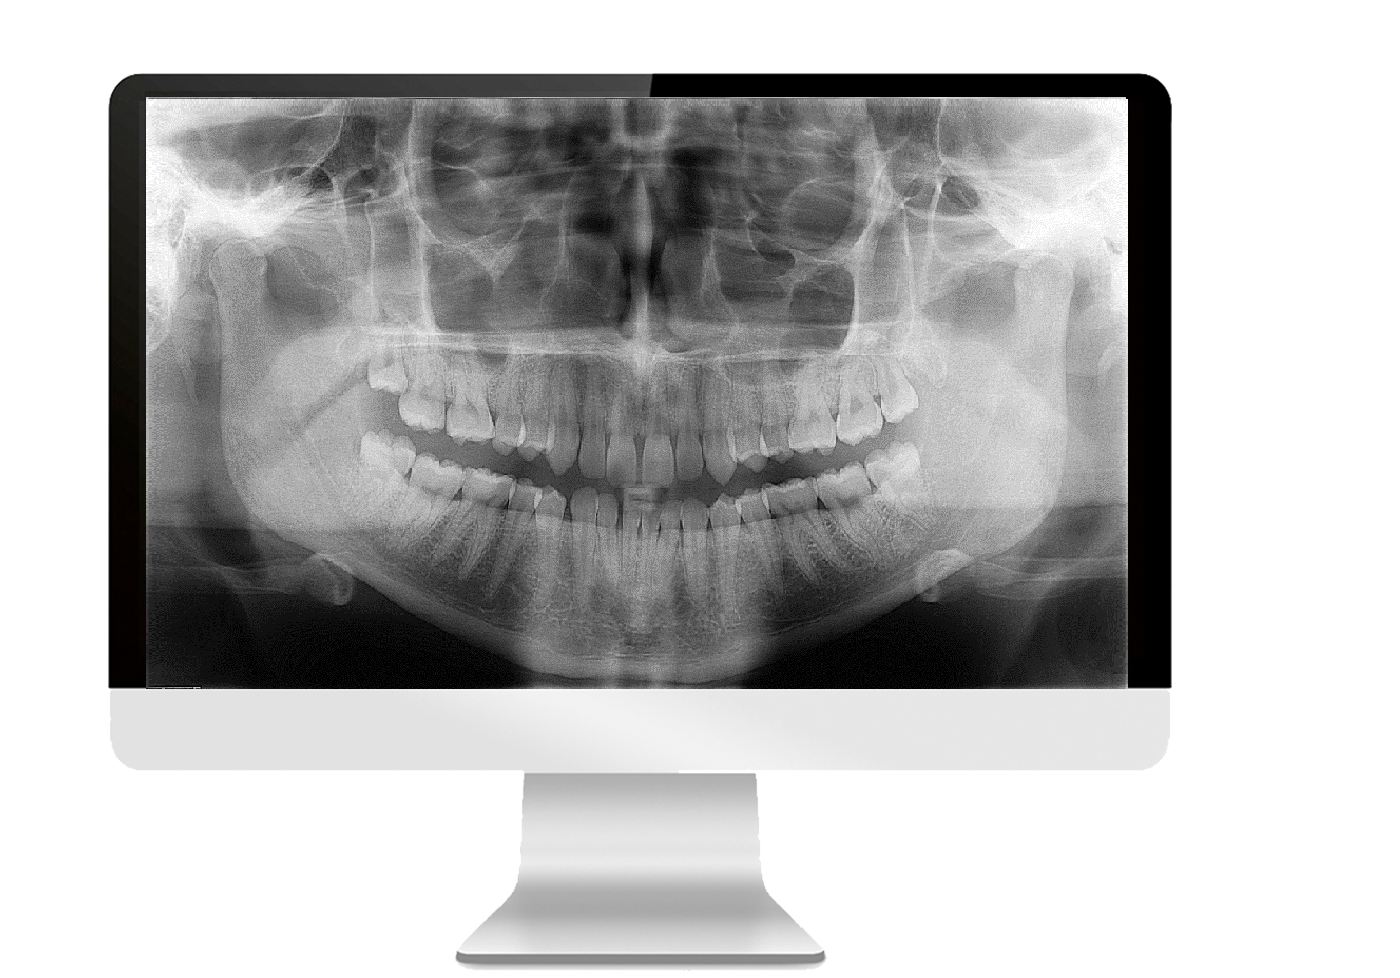 2-D Extraoral Digital Radiography